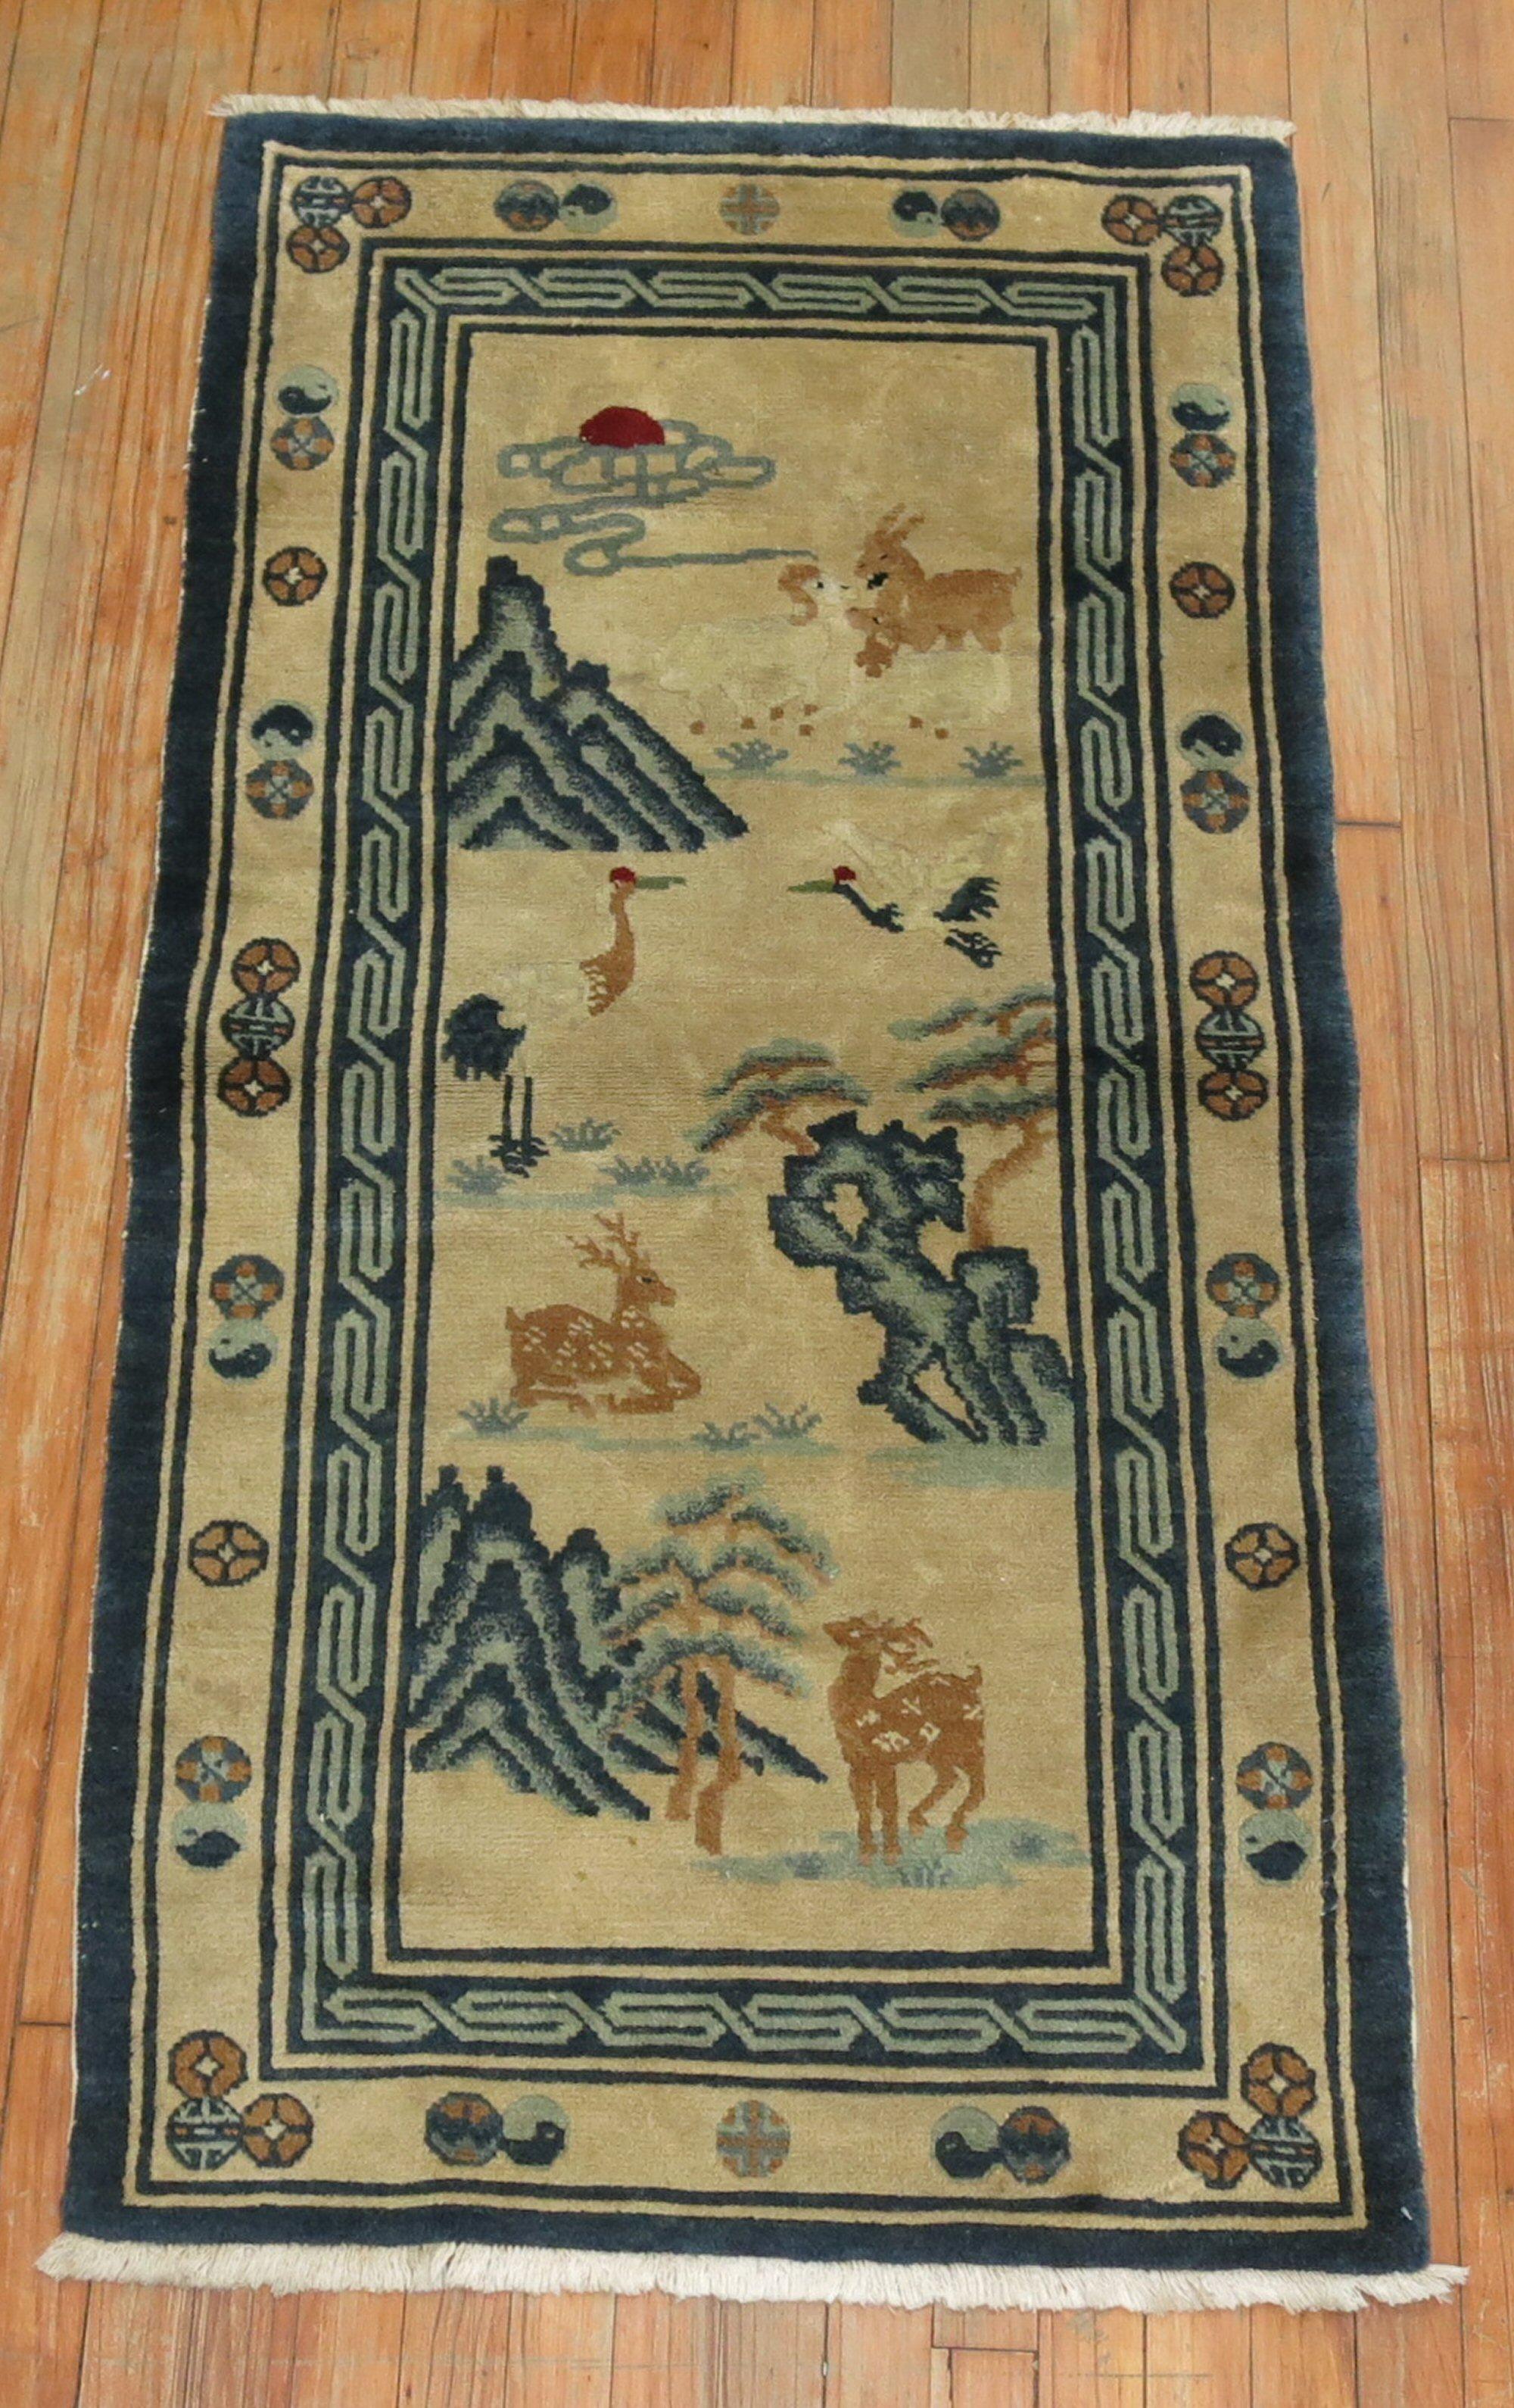 An ivory field Chinese Peking rug with a pictorial animal motif. 2 deers, birds, a goat, rabbit and swan. some nice pretty blues too, circa 1940

Measures: 2'6